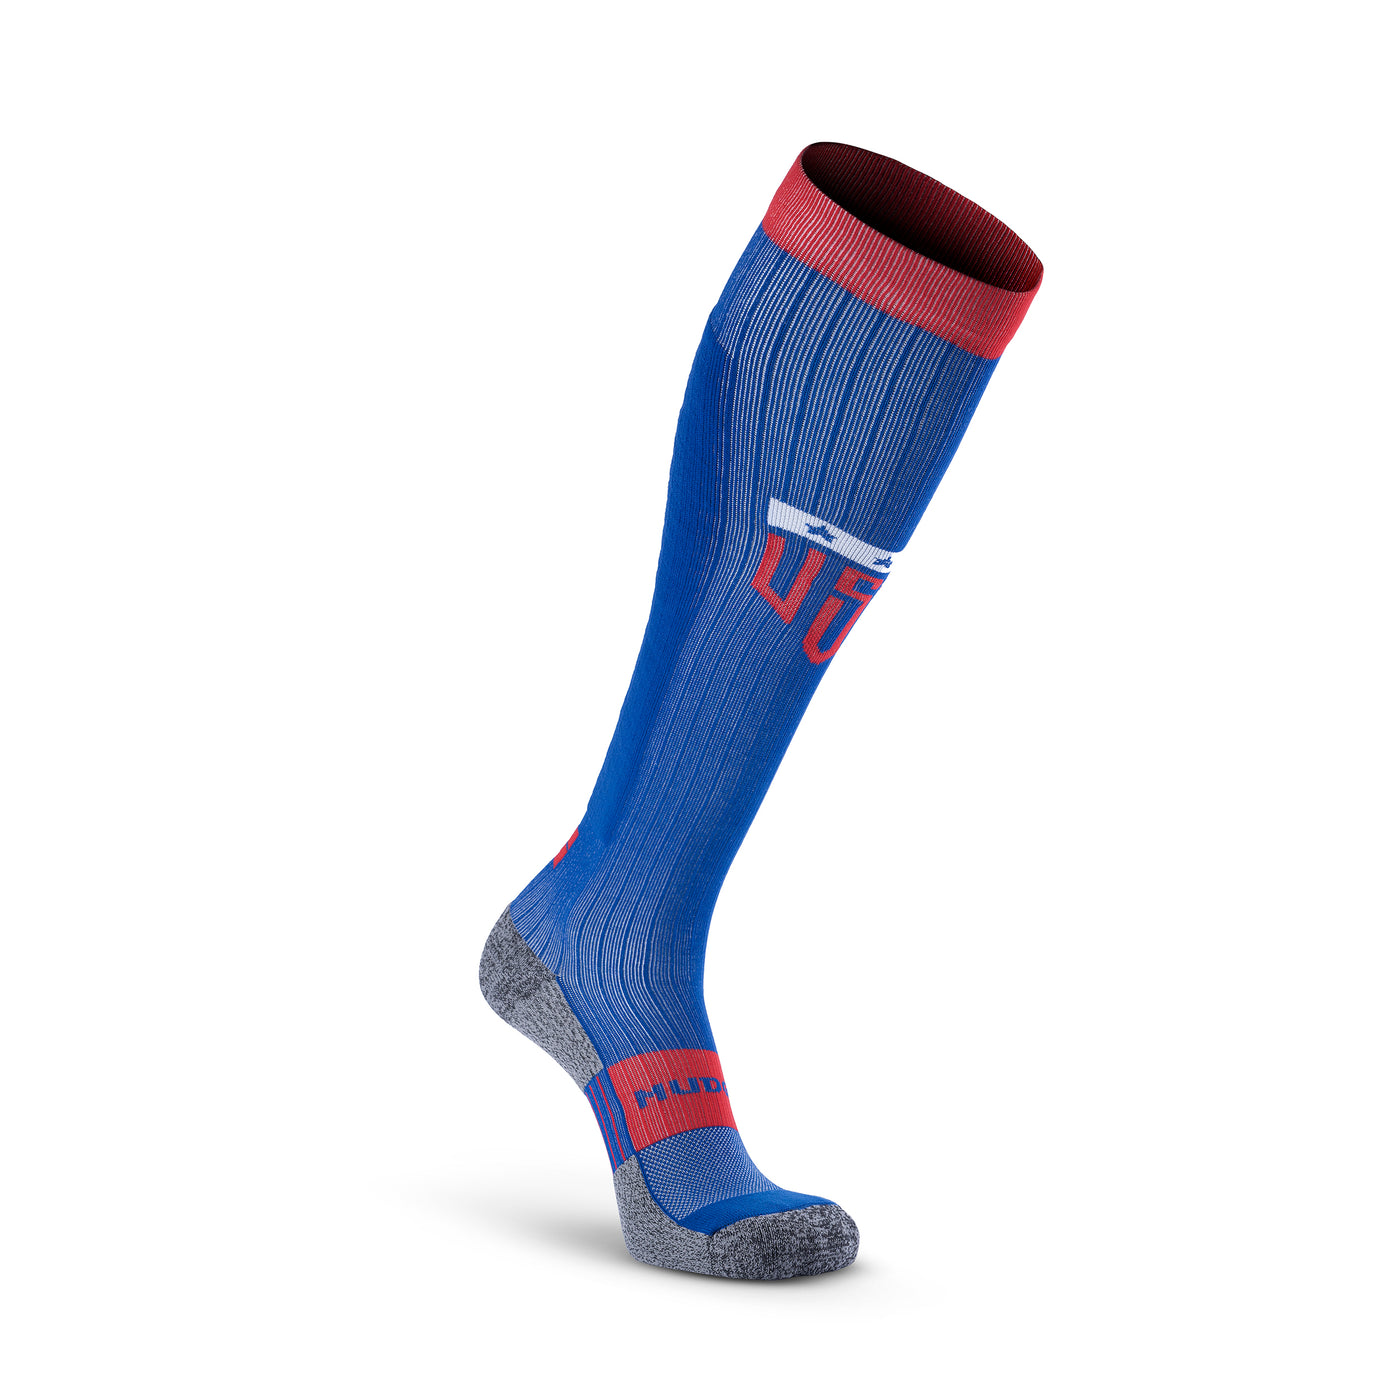 Tall Compression Socks for OCR - Essential Gear for Athletes